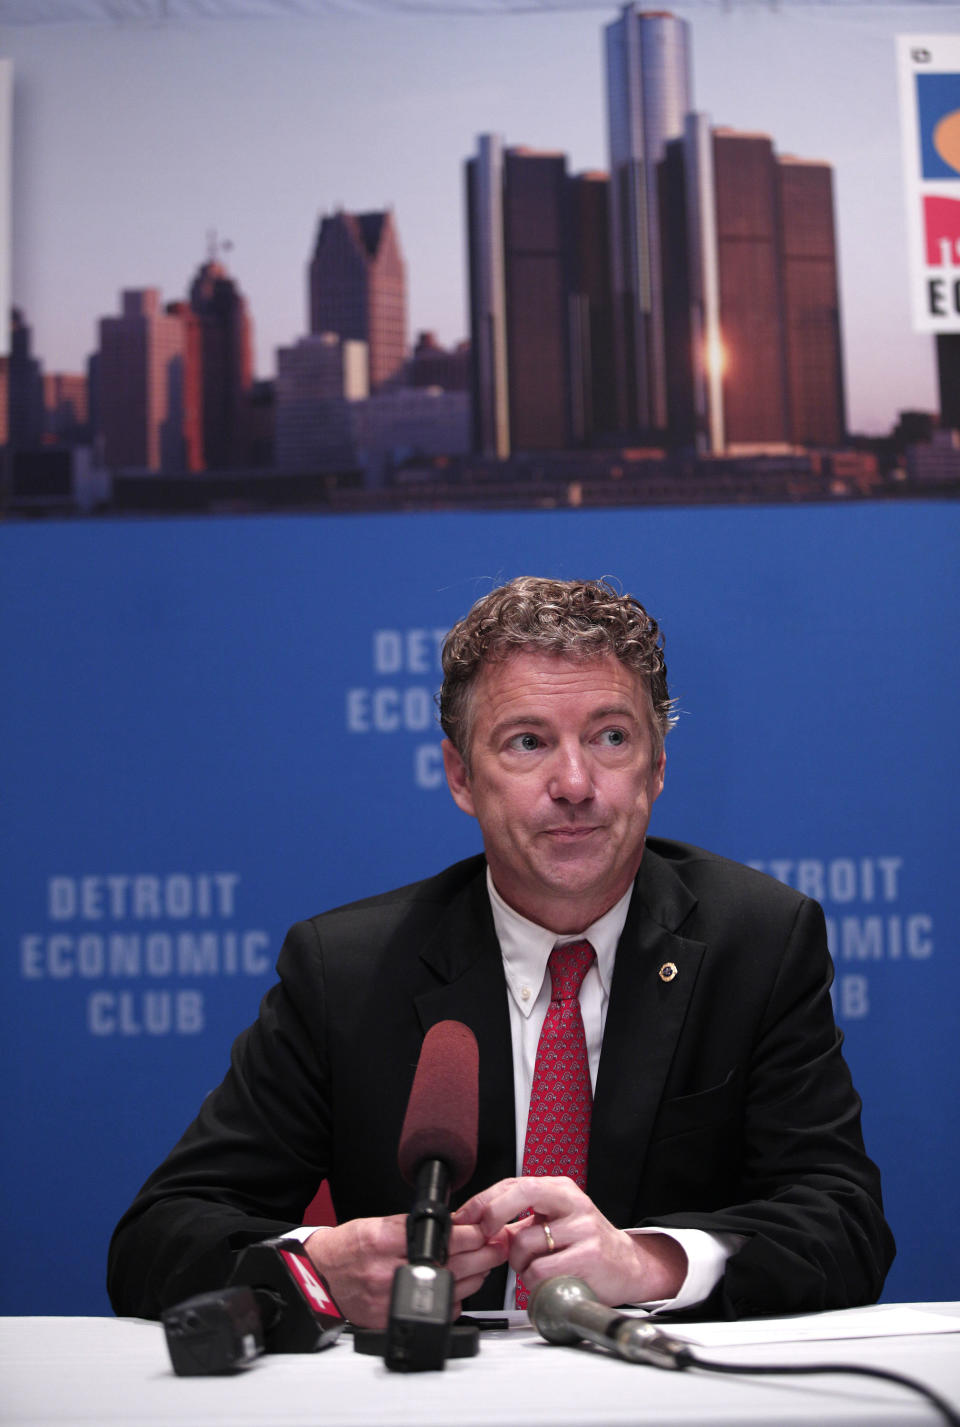 DETROIT, MI - DECEMBER 6: U.S. Sen. Rand Paul (R-KY) speaks with the news media after delivering a speech titled, 'Renewing the Opportunity for Prosperity: Economic Freedom Zones' at the Detroit Economic Club December 6, 2013 in Detroit, Michigan. As part of his plan to help save Detroit, the largest city in U.S. history to go bankrupt, and other economically depressed areas, the Senator will introduce legislation that will create so-called 'economic freedom zones' by lowering taxes in those areas and change the Visa rules to help make it easier for foreign entrepreneurs to immigrate to economically depressed cities. (Photo by Bill Pugliano/Getty Images)